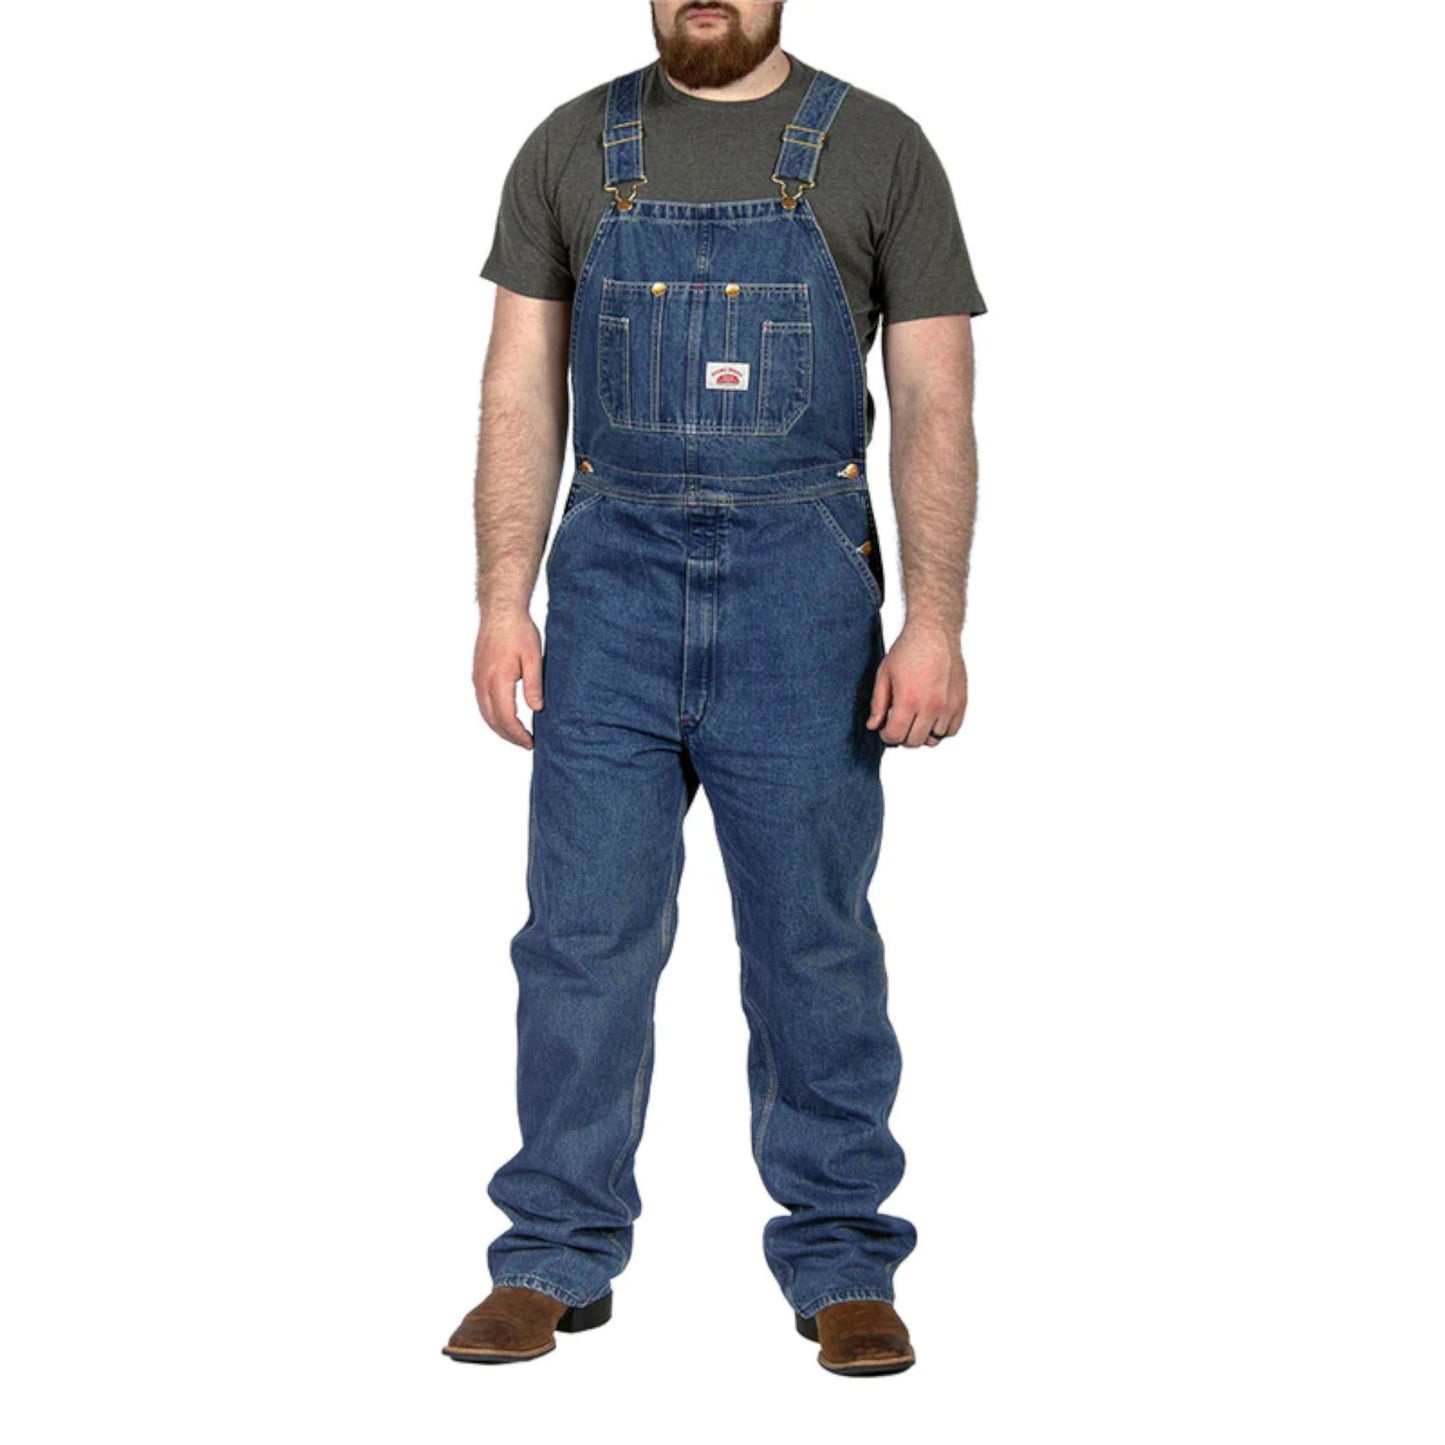 Round House MADE IN USA #699 Stone Washed Bib Overalls